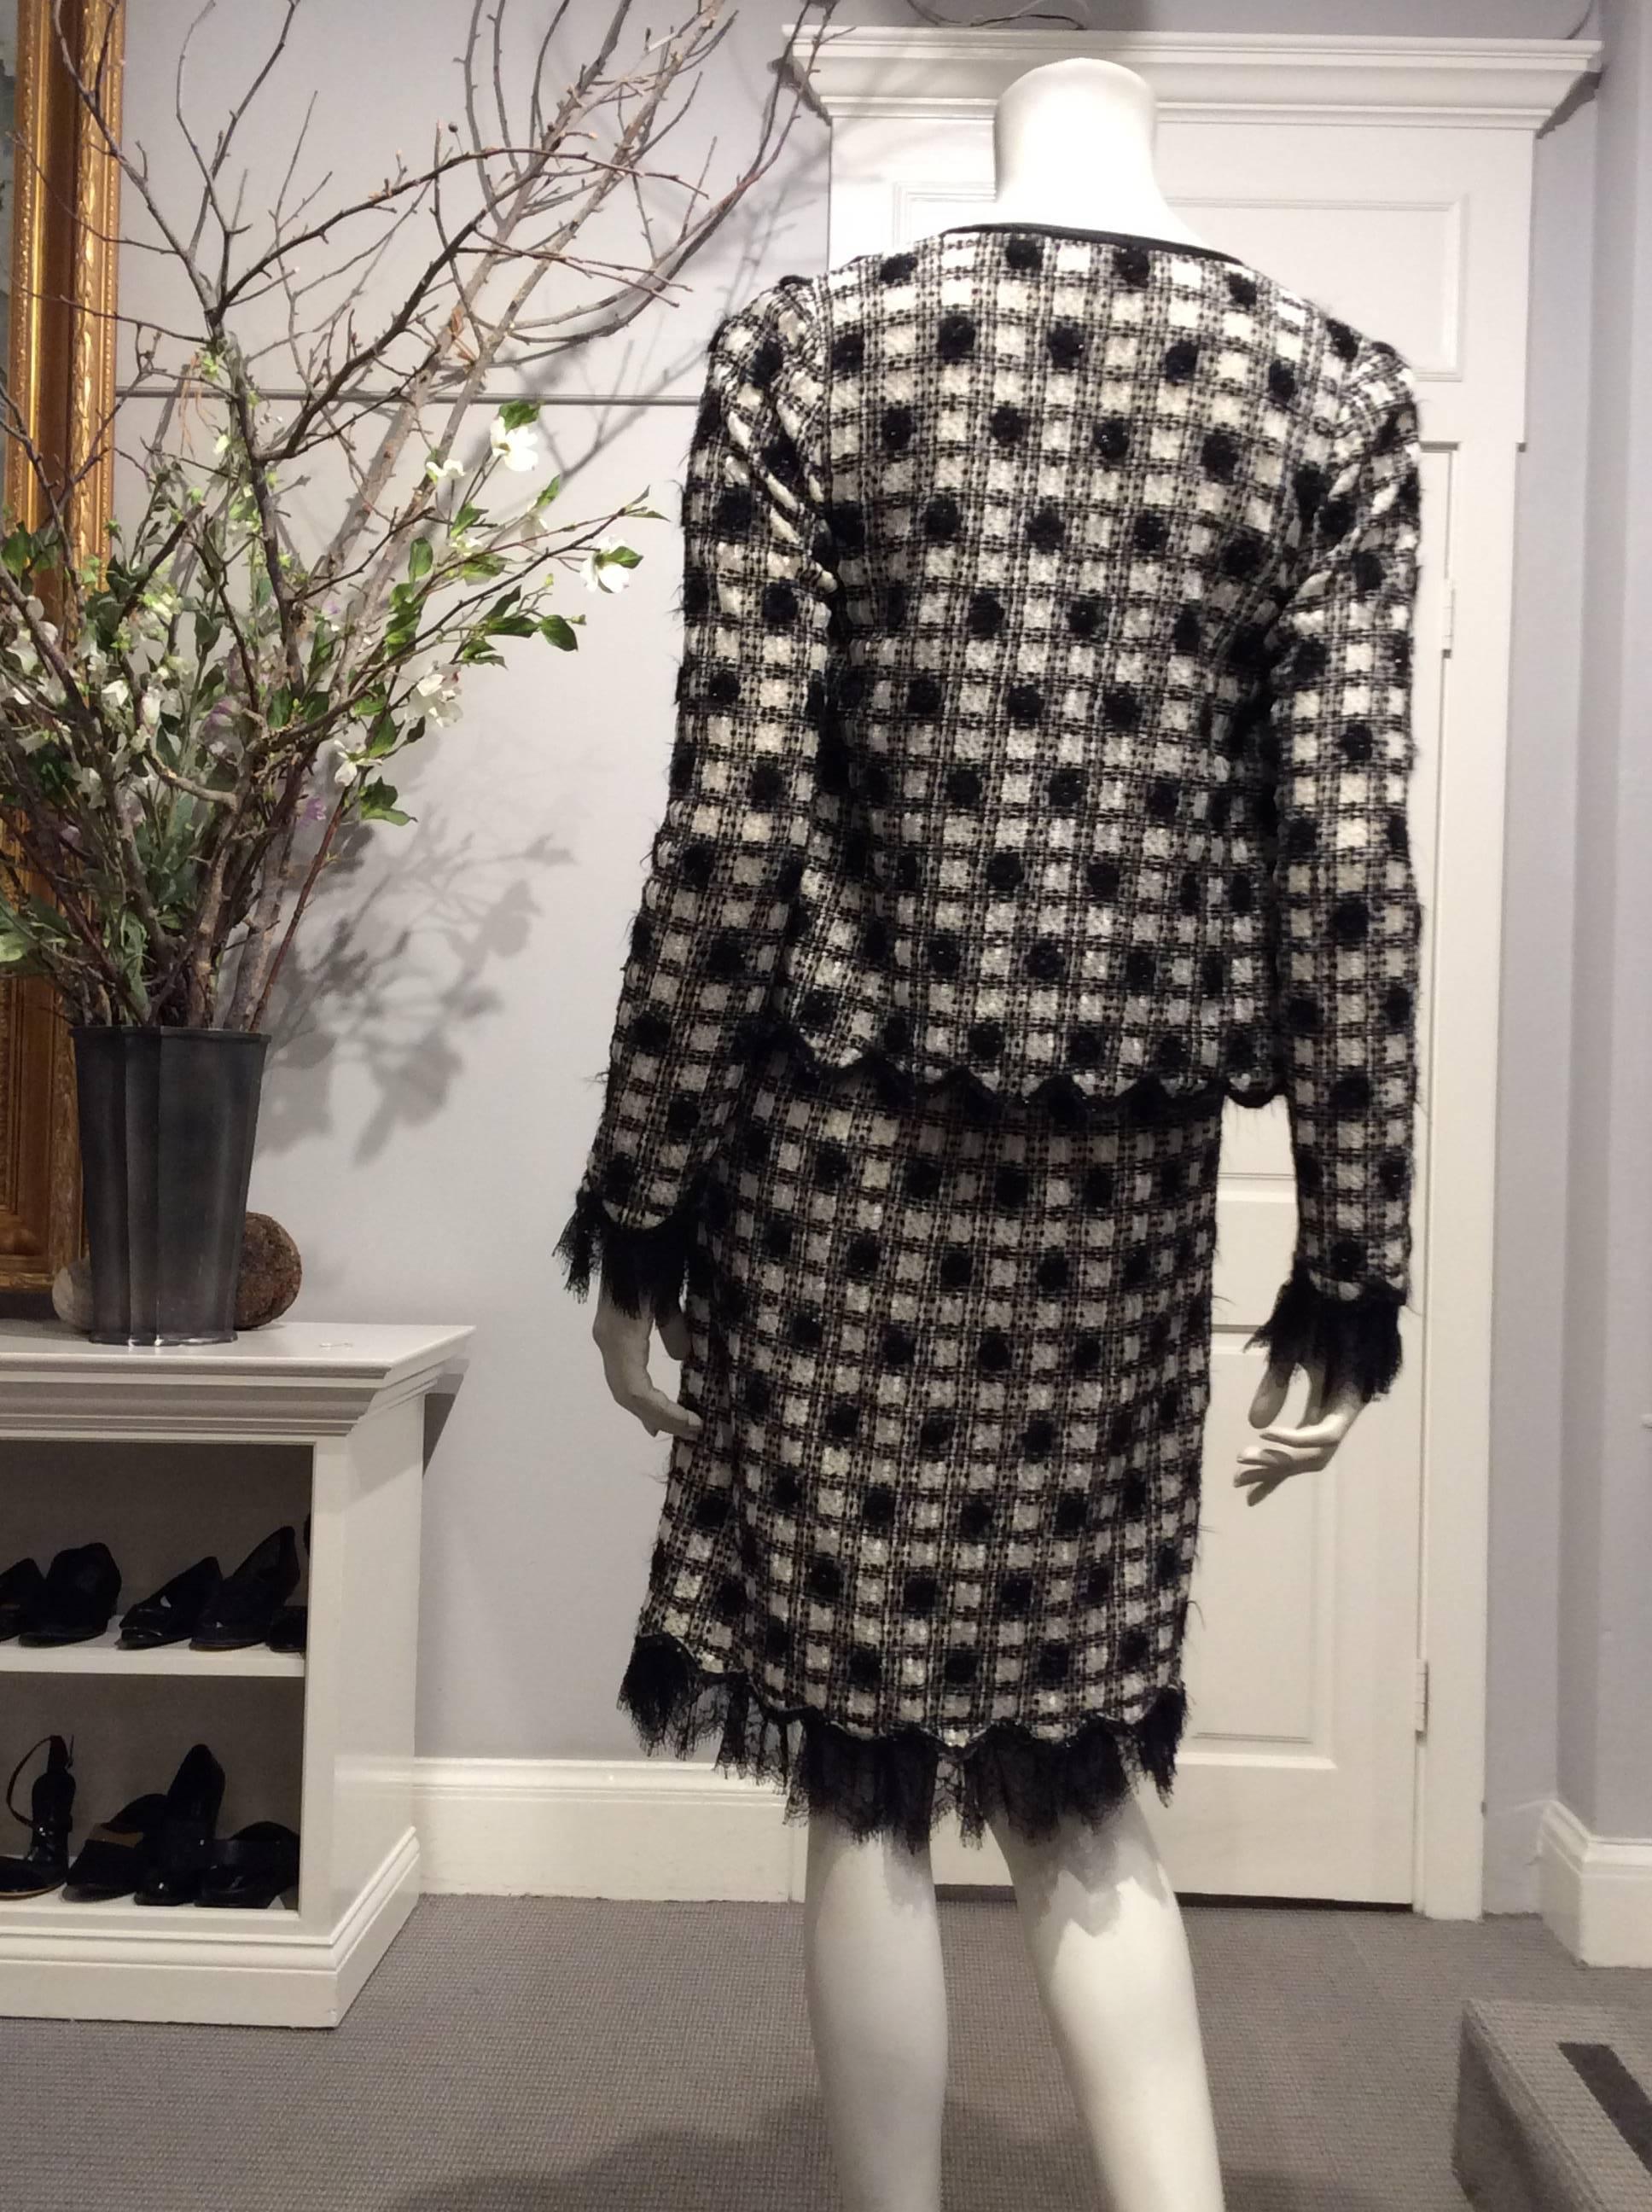 Chanel Black And White Dress With Matching Jacket Sz 38 In Good Condition For Sale In San Francisco, CA